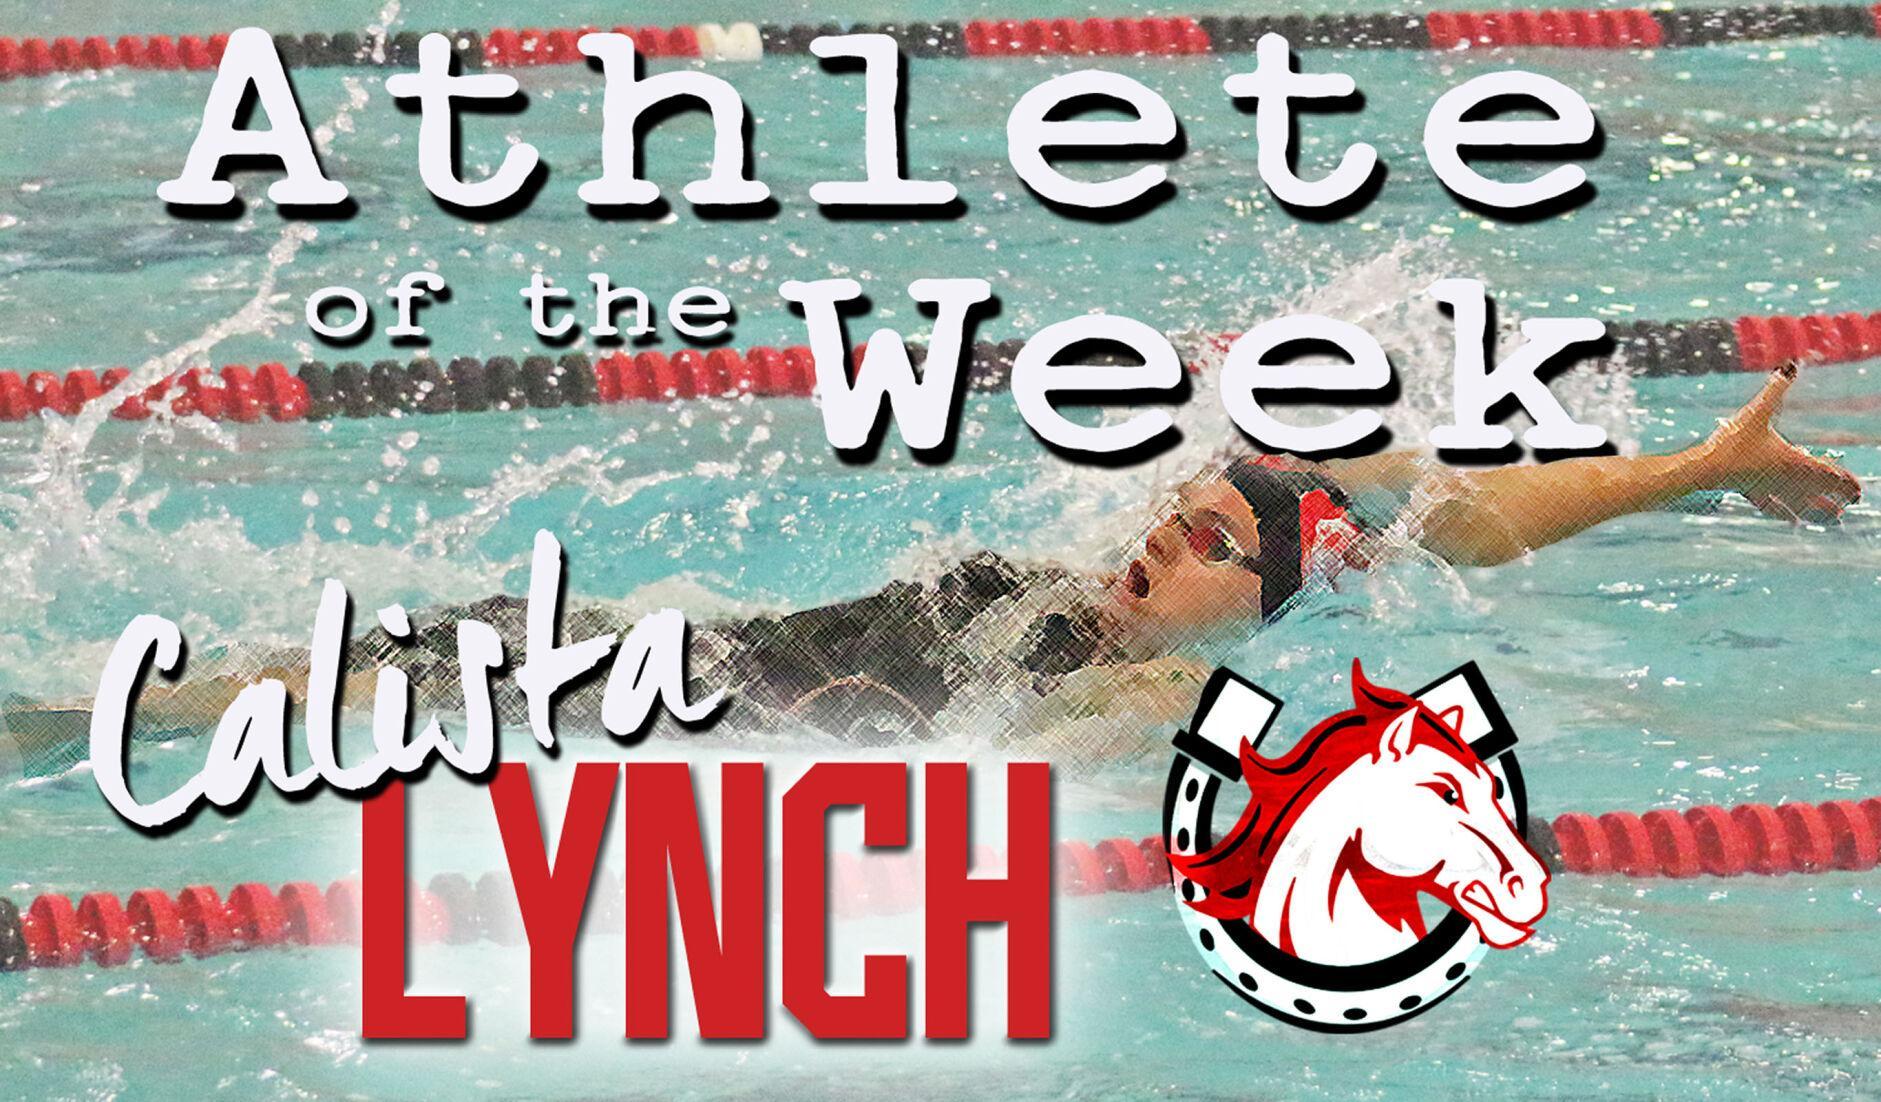 San Mateo Daily Journal recognizes El Camino High senior Calista Lynch as Athlete of the Week for 5-1-2023.